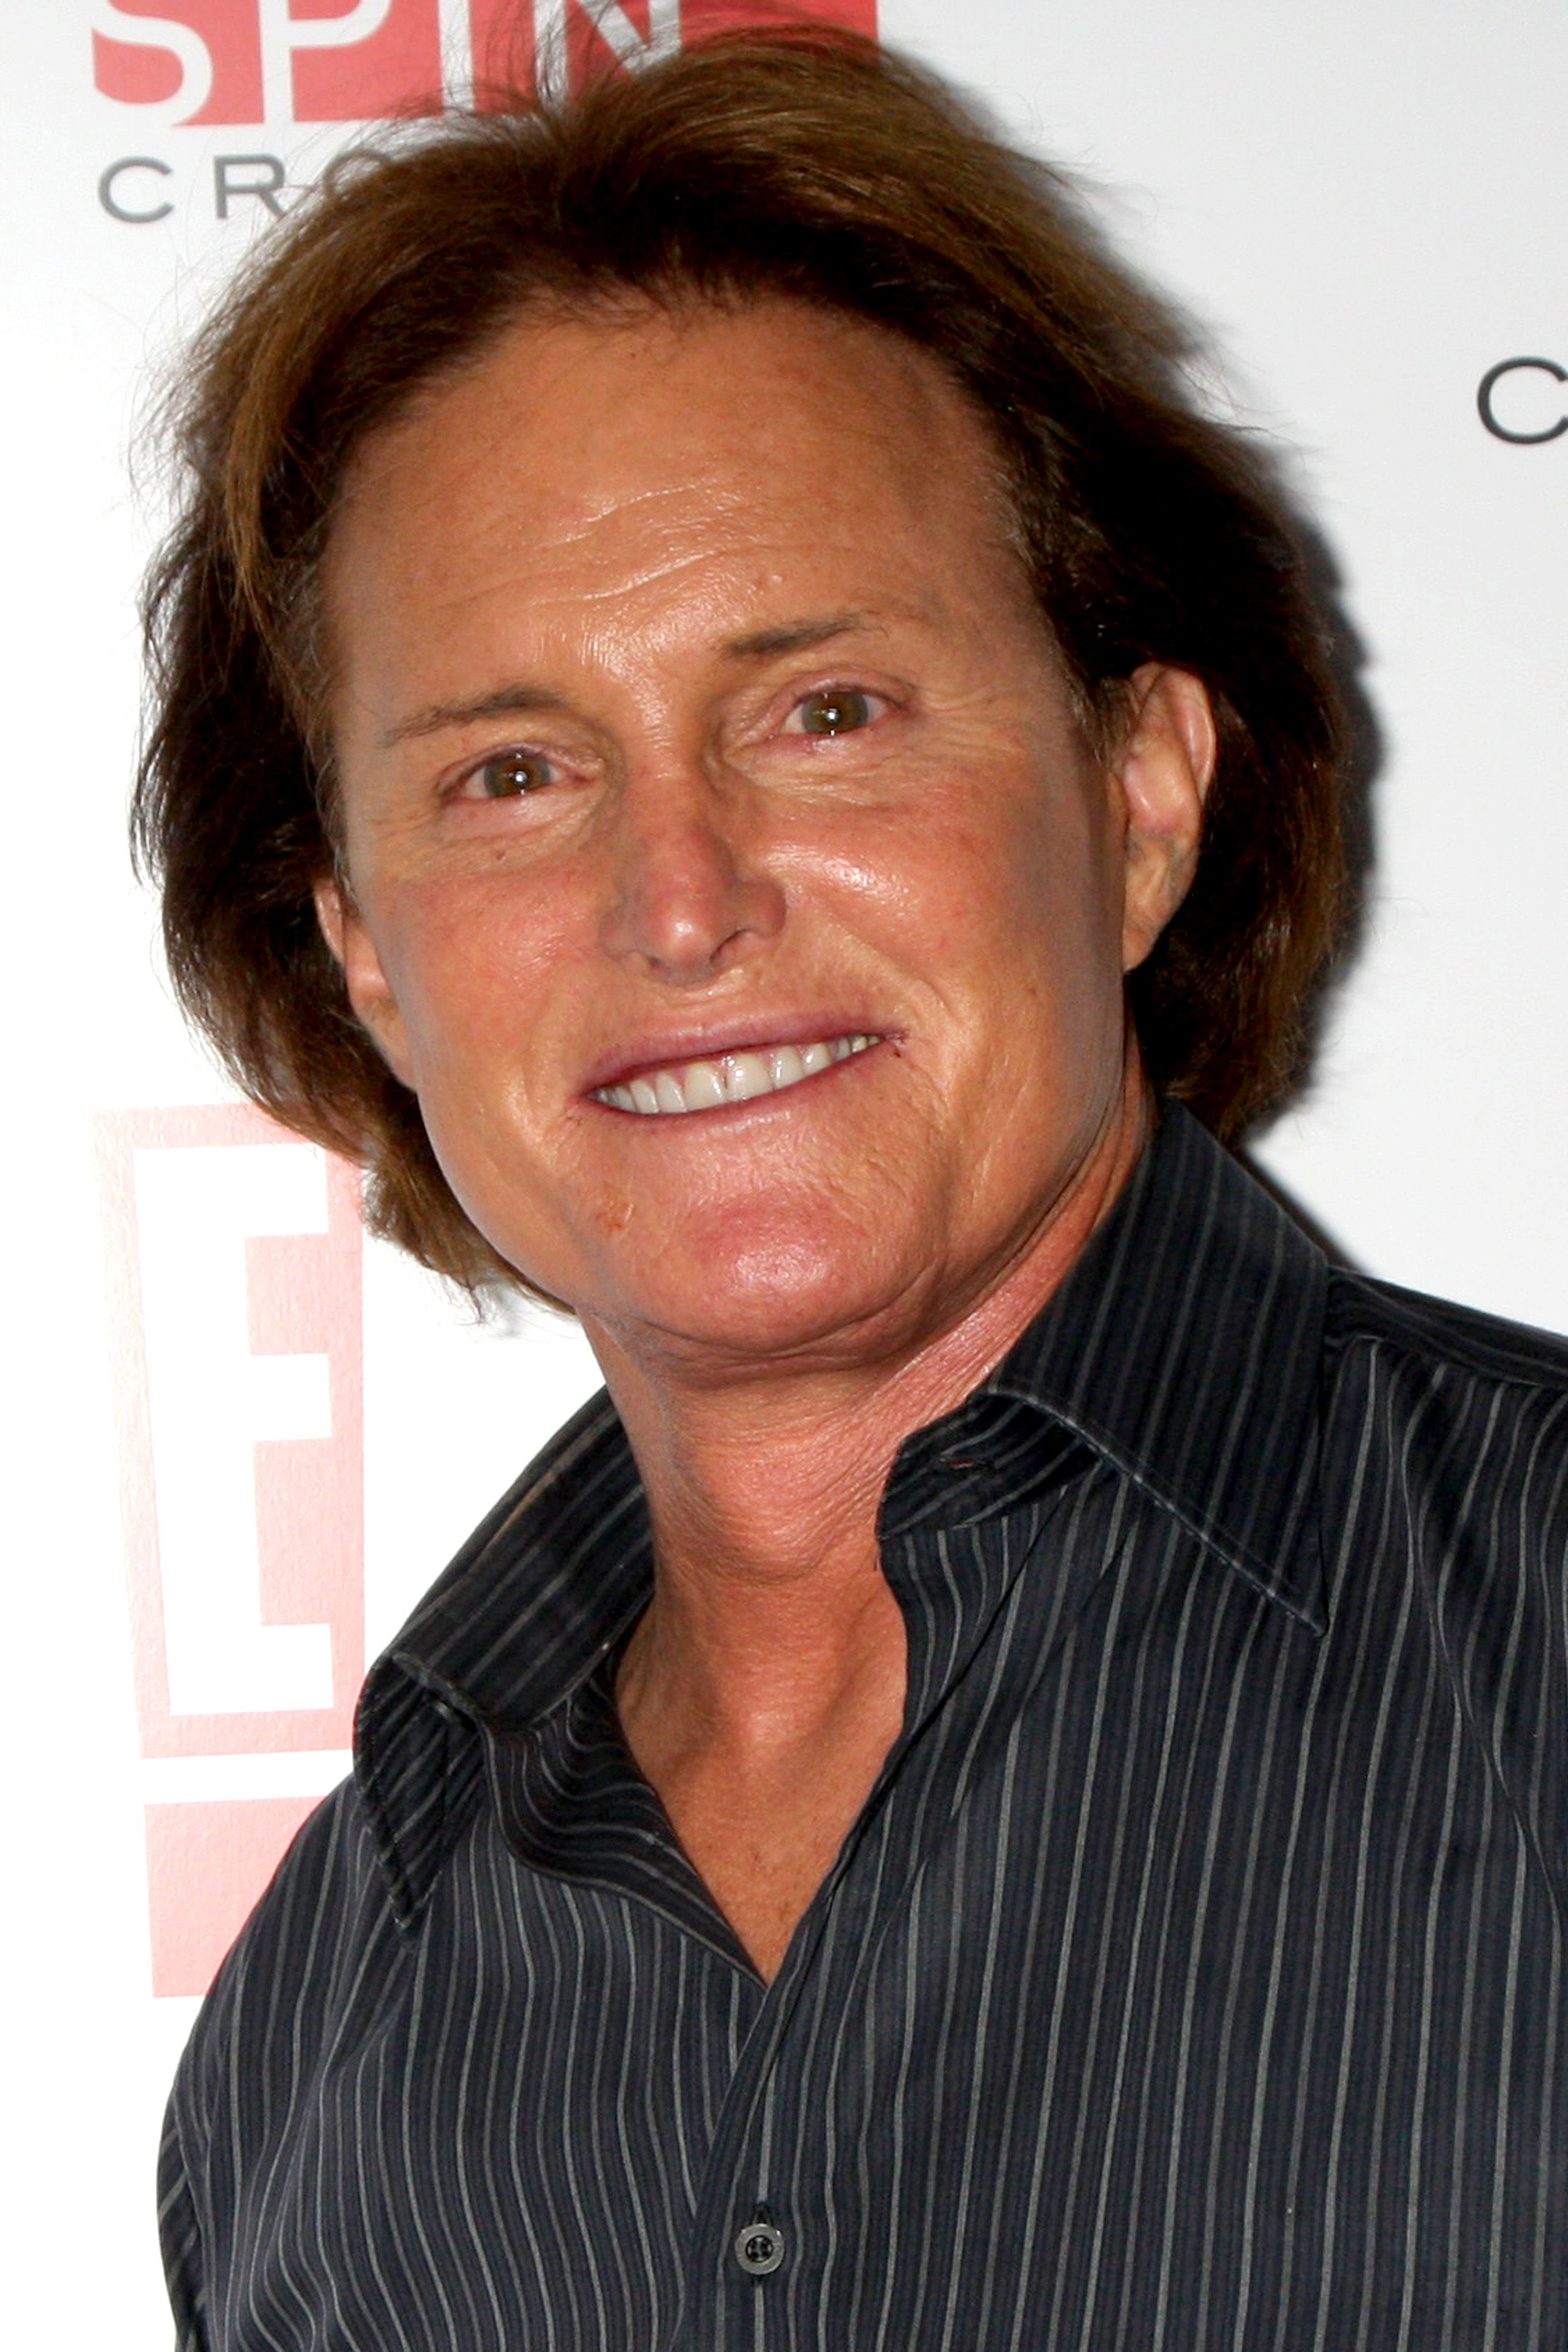  Bruce Jenner wears a striped button-up.